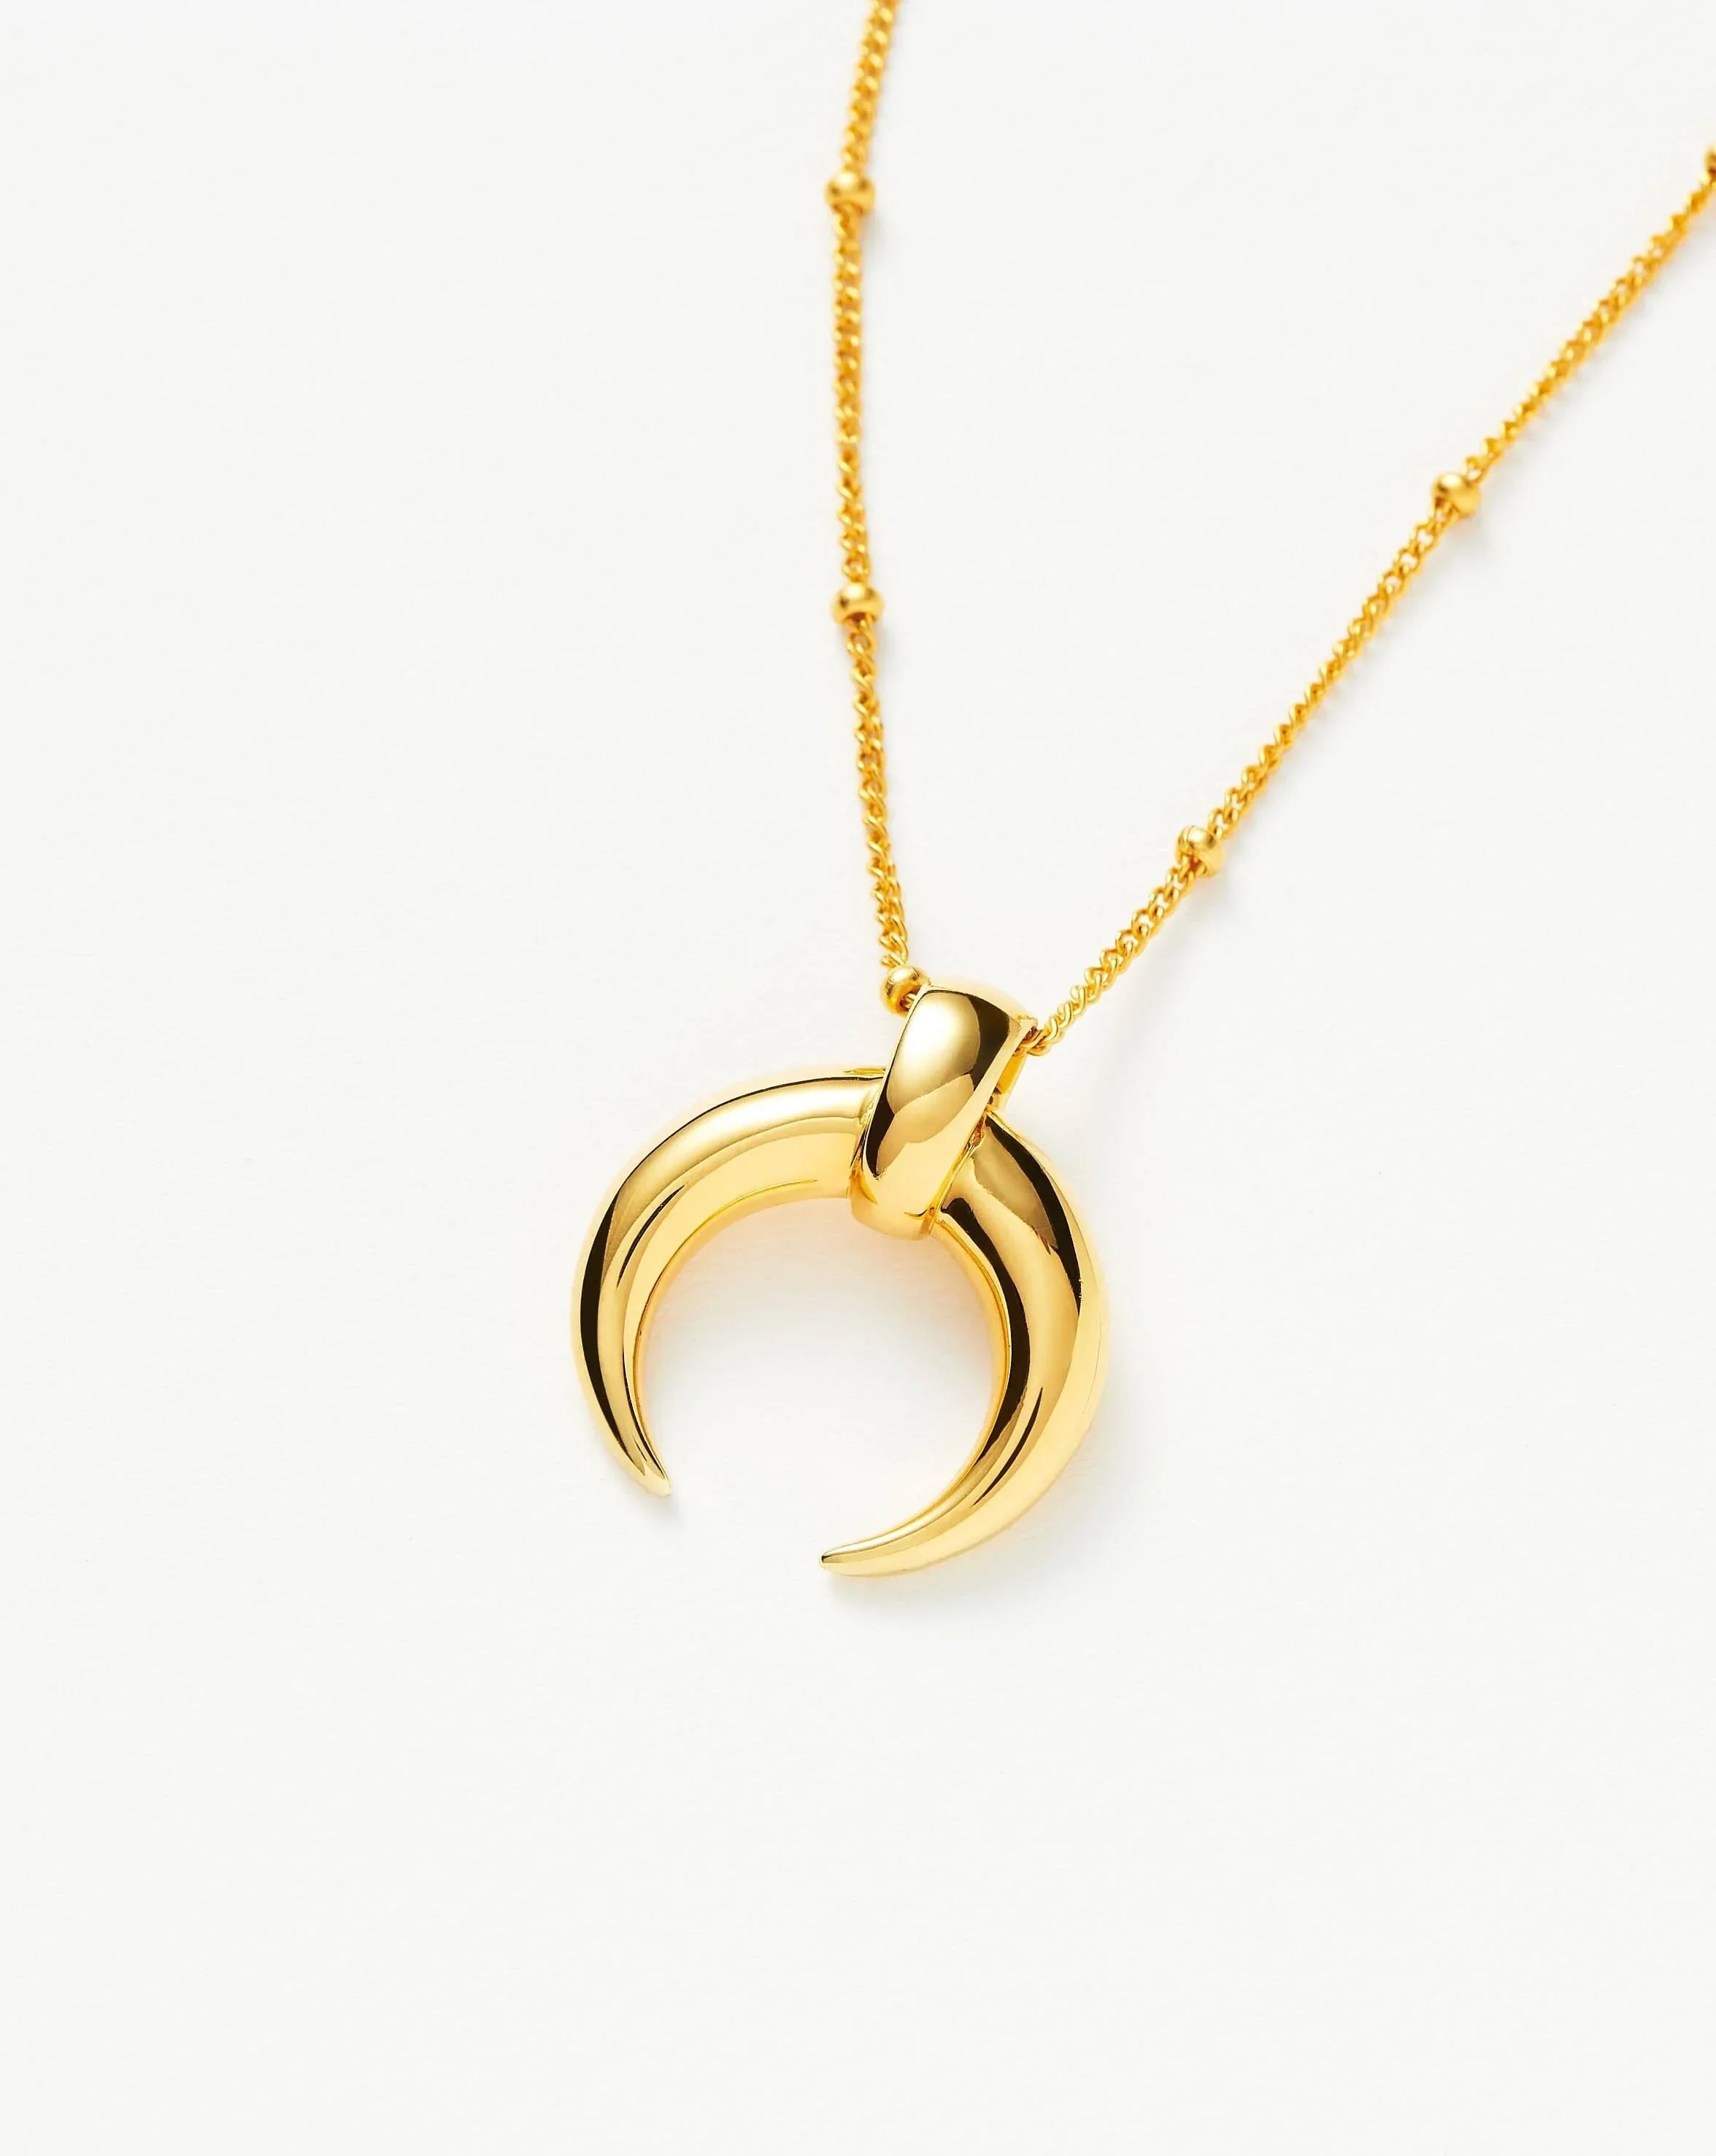 Crescent horn necklace and the meaning behind it | Horn Necklace